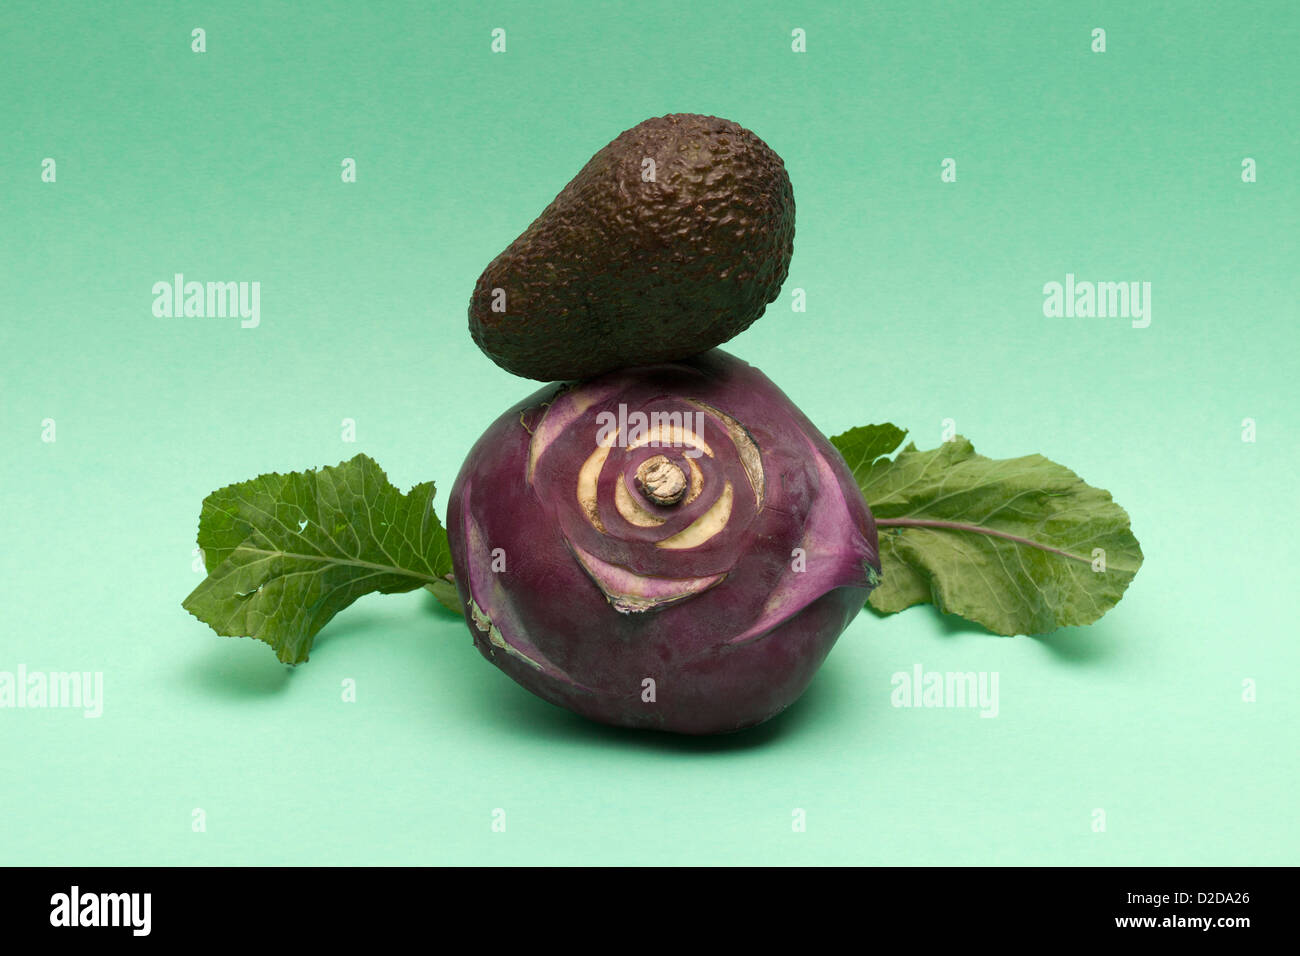 An abstract arrangement of lettuce leaf, avocado and kohlrabi Stock Photo